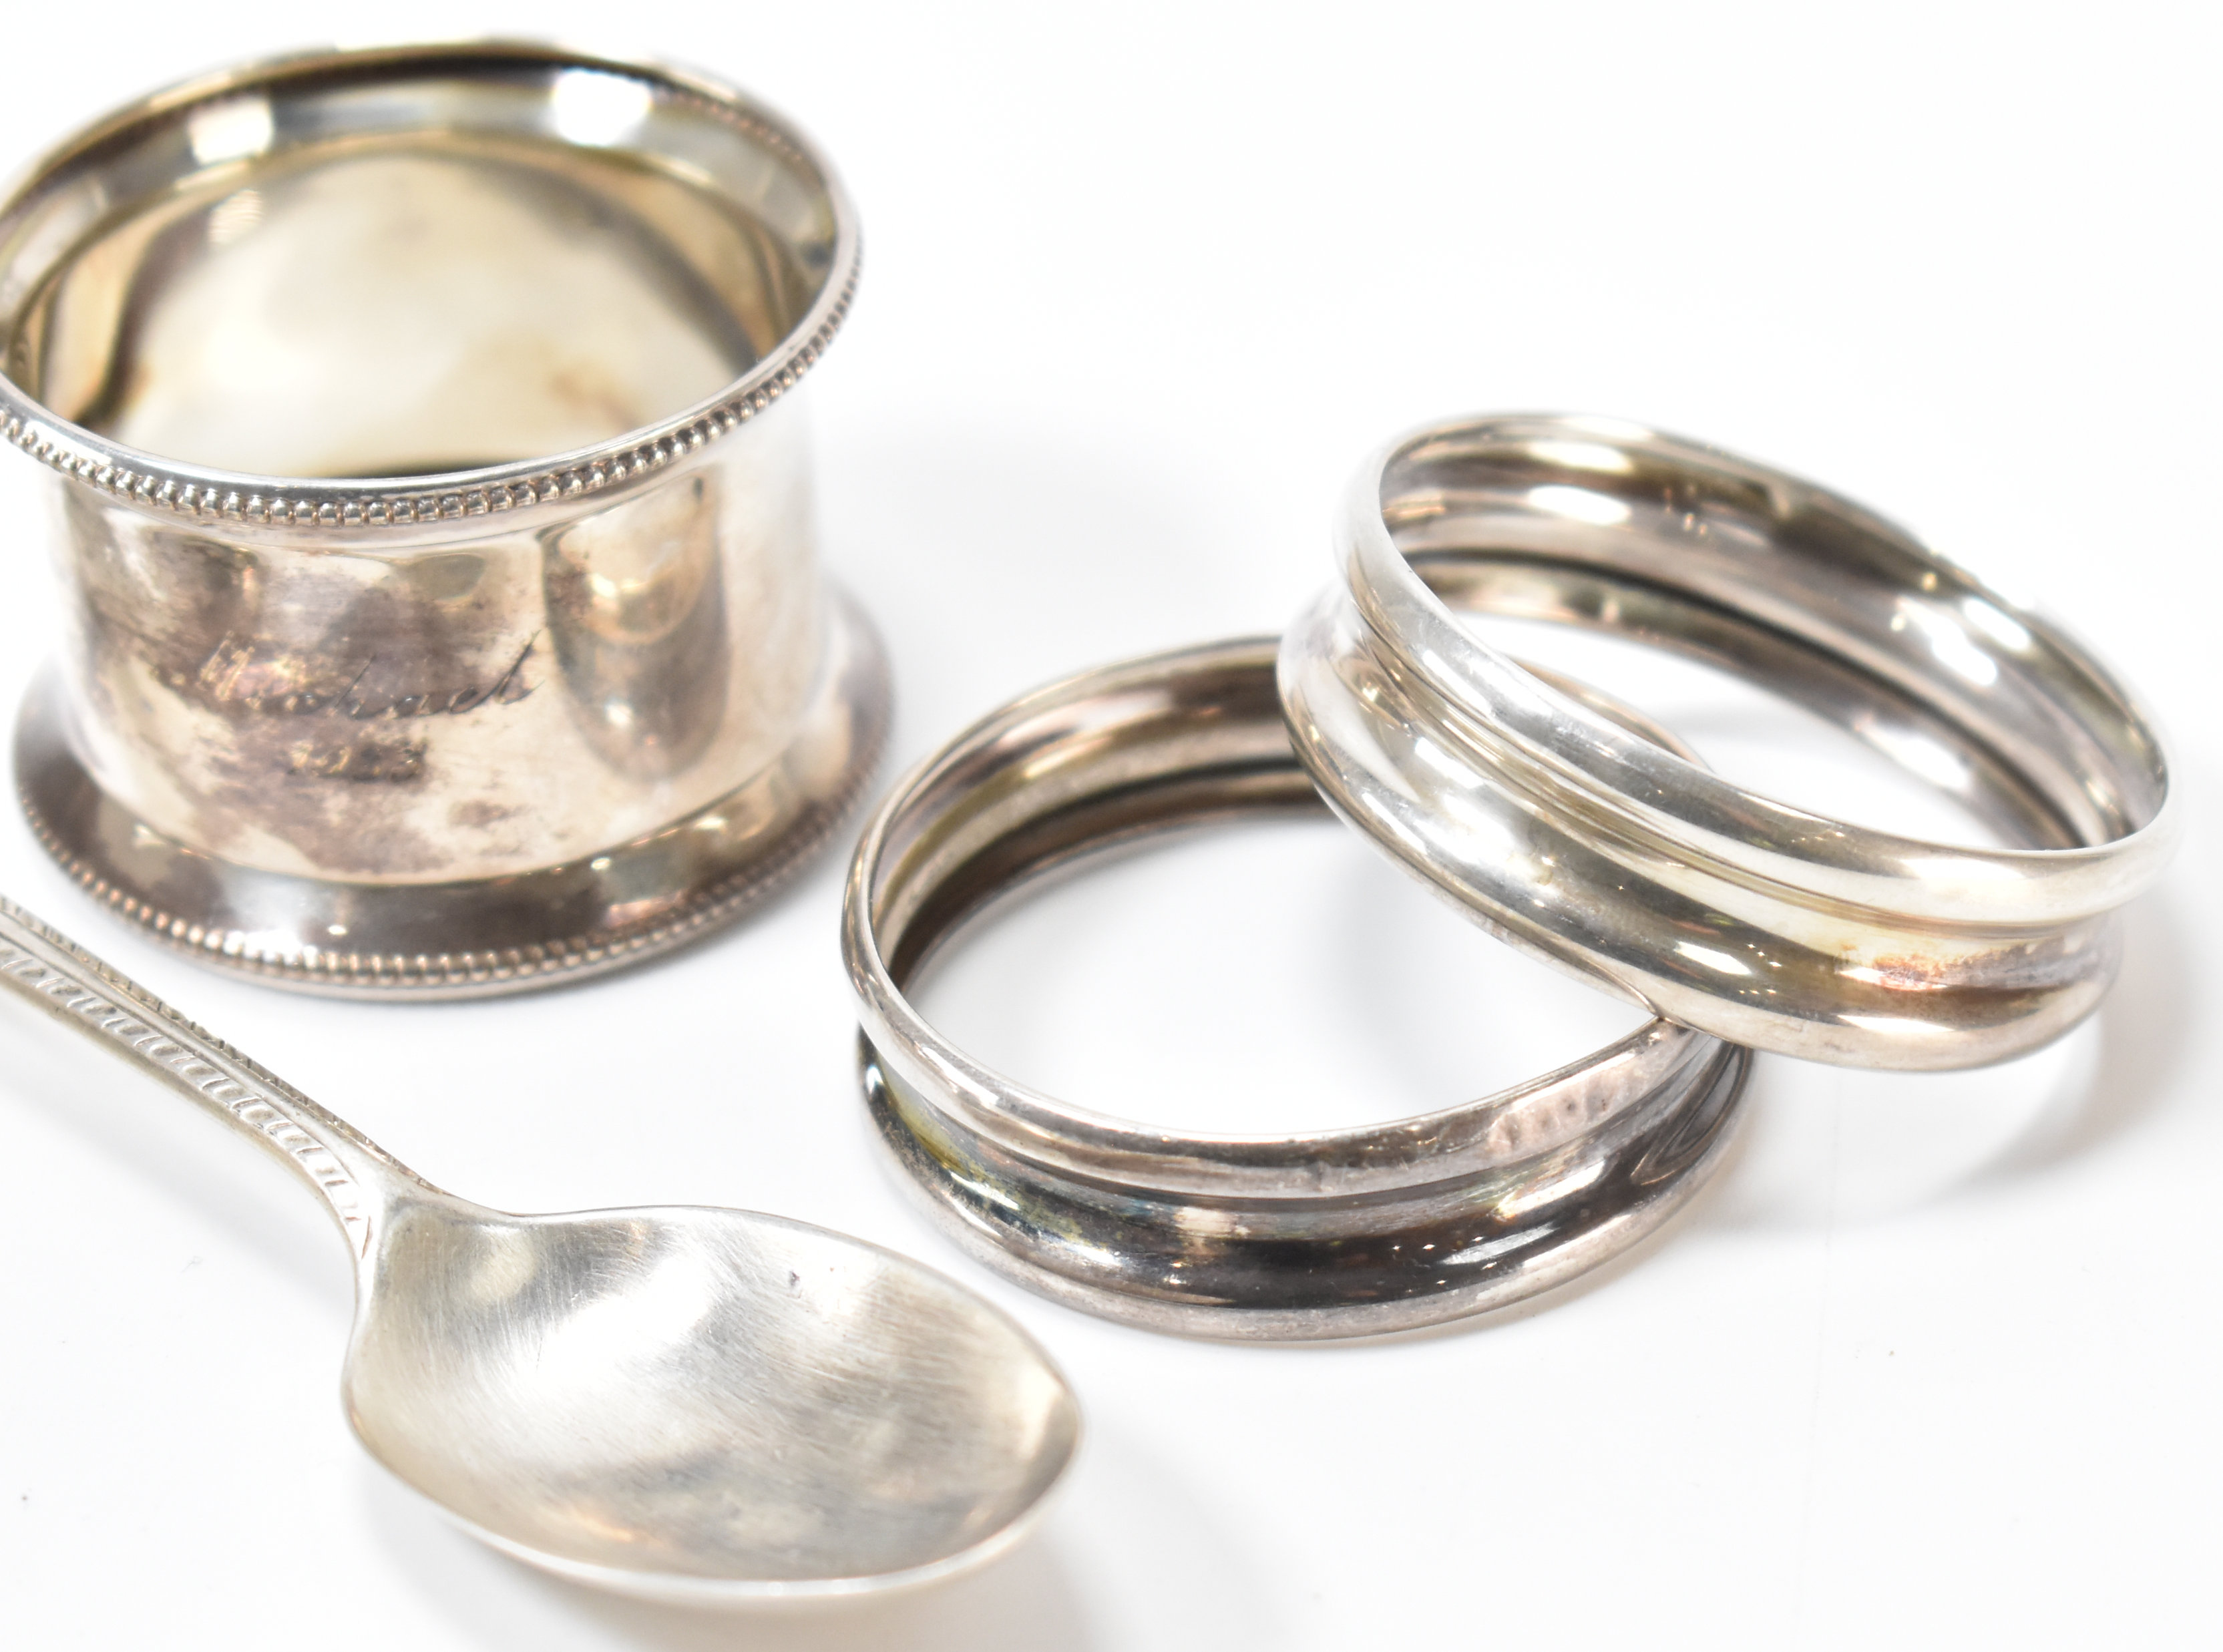 GROUP OF SILVER HALLMARKED ITEMS - NAPKIN RINGS & SPOON - Image 5 of 5